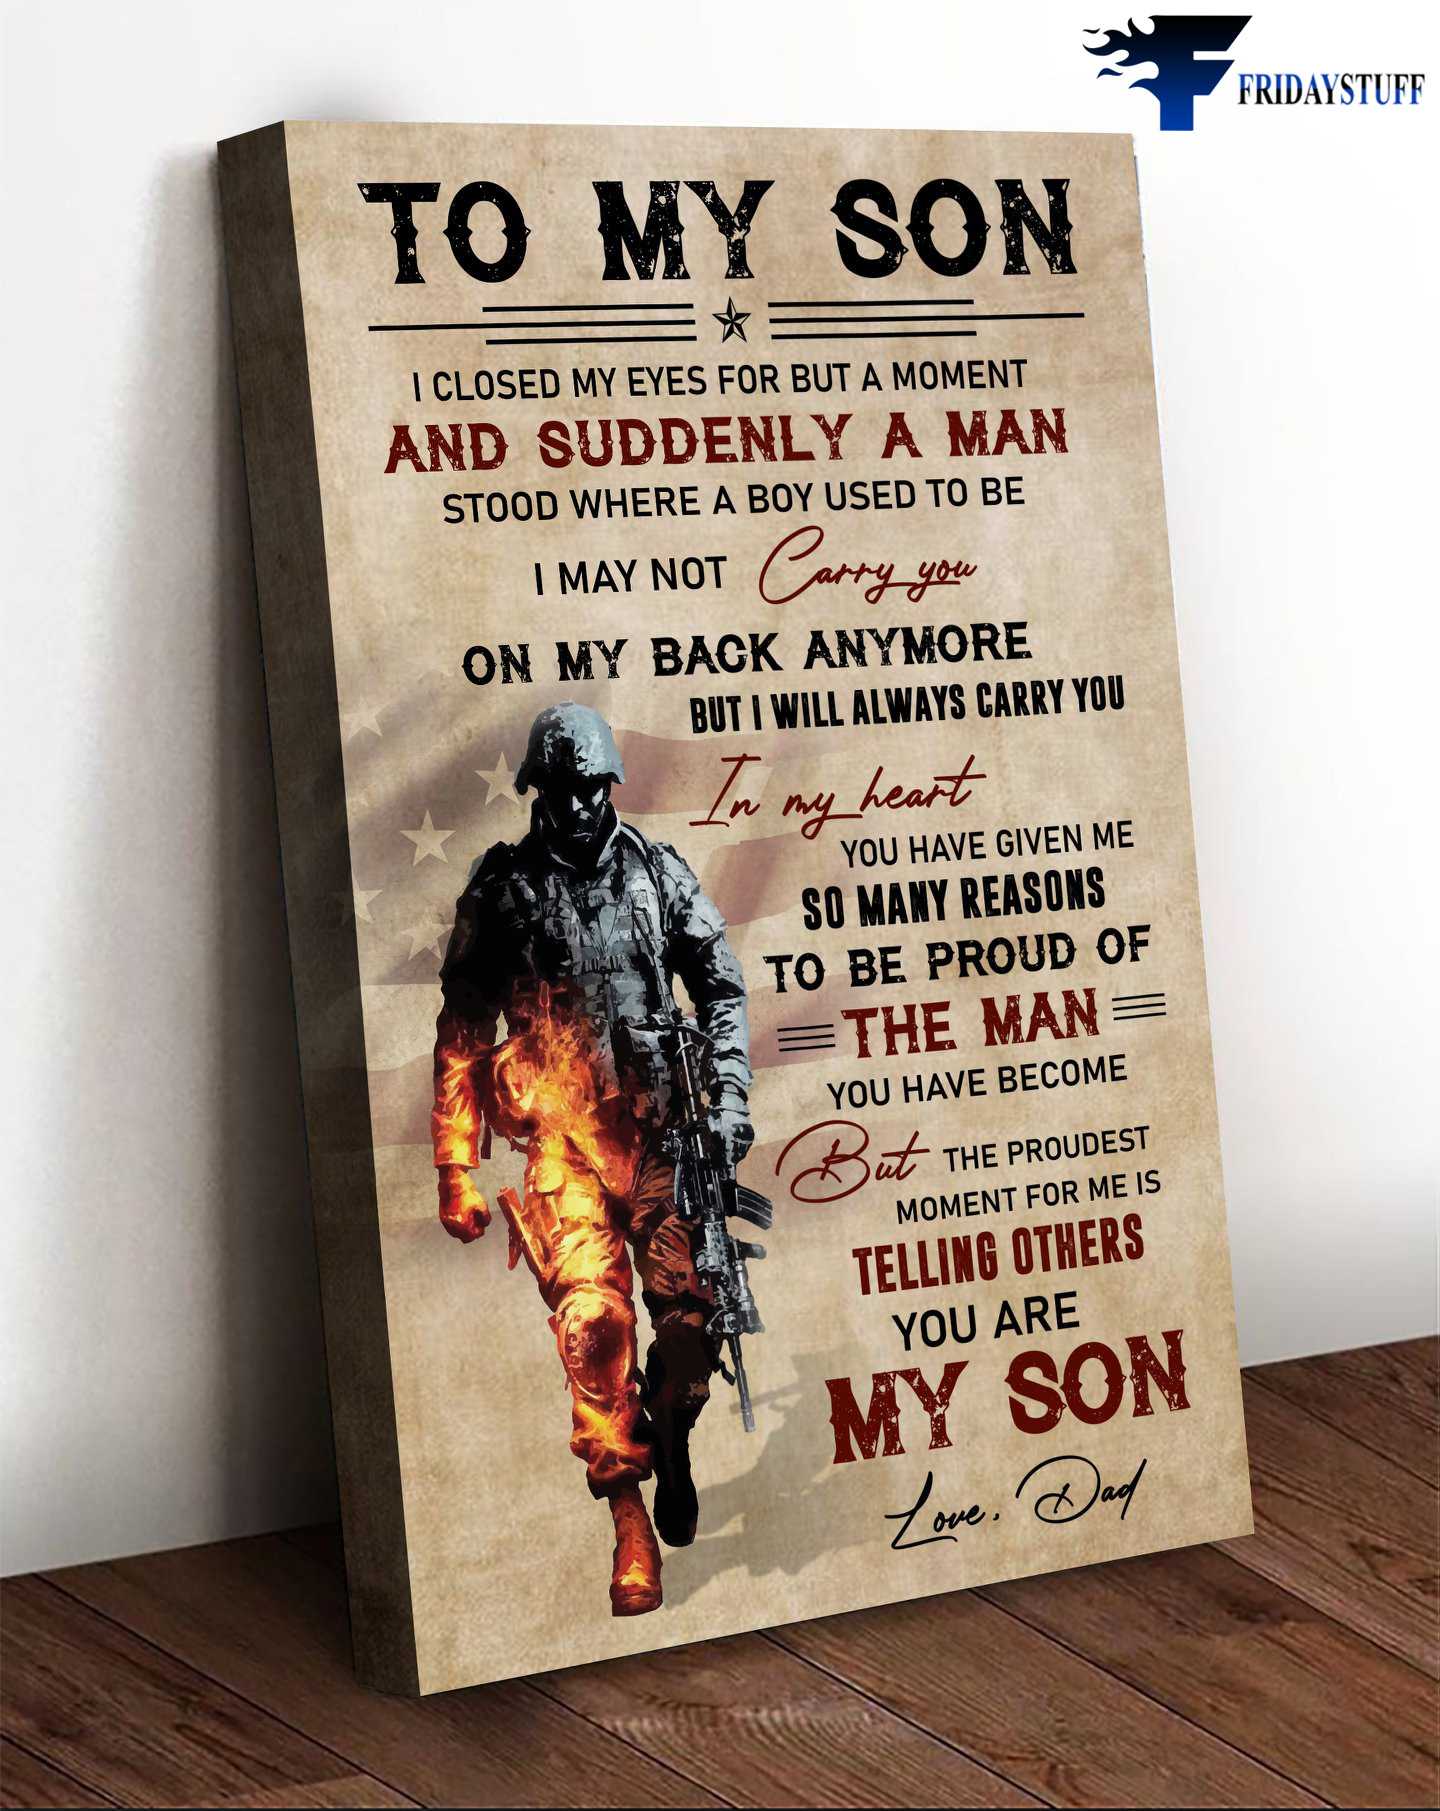 Soldier Poster, Dad And Son, I Closed My Eyes For But A Moment, And Suddenly A Man Stood, Where A Boy Used To Be, I May Not Carry You On My Back Anymore